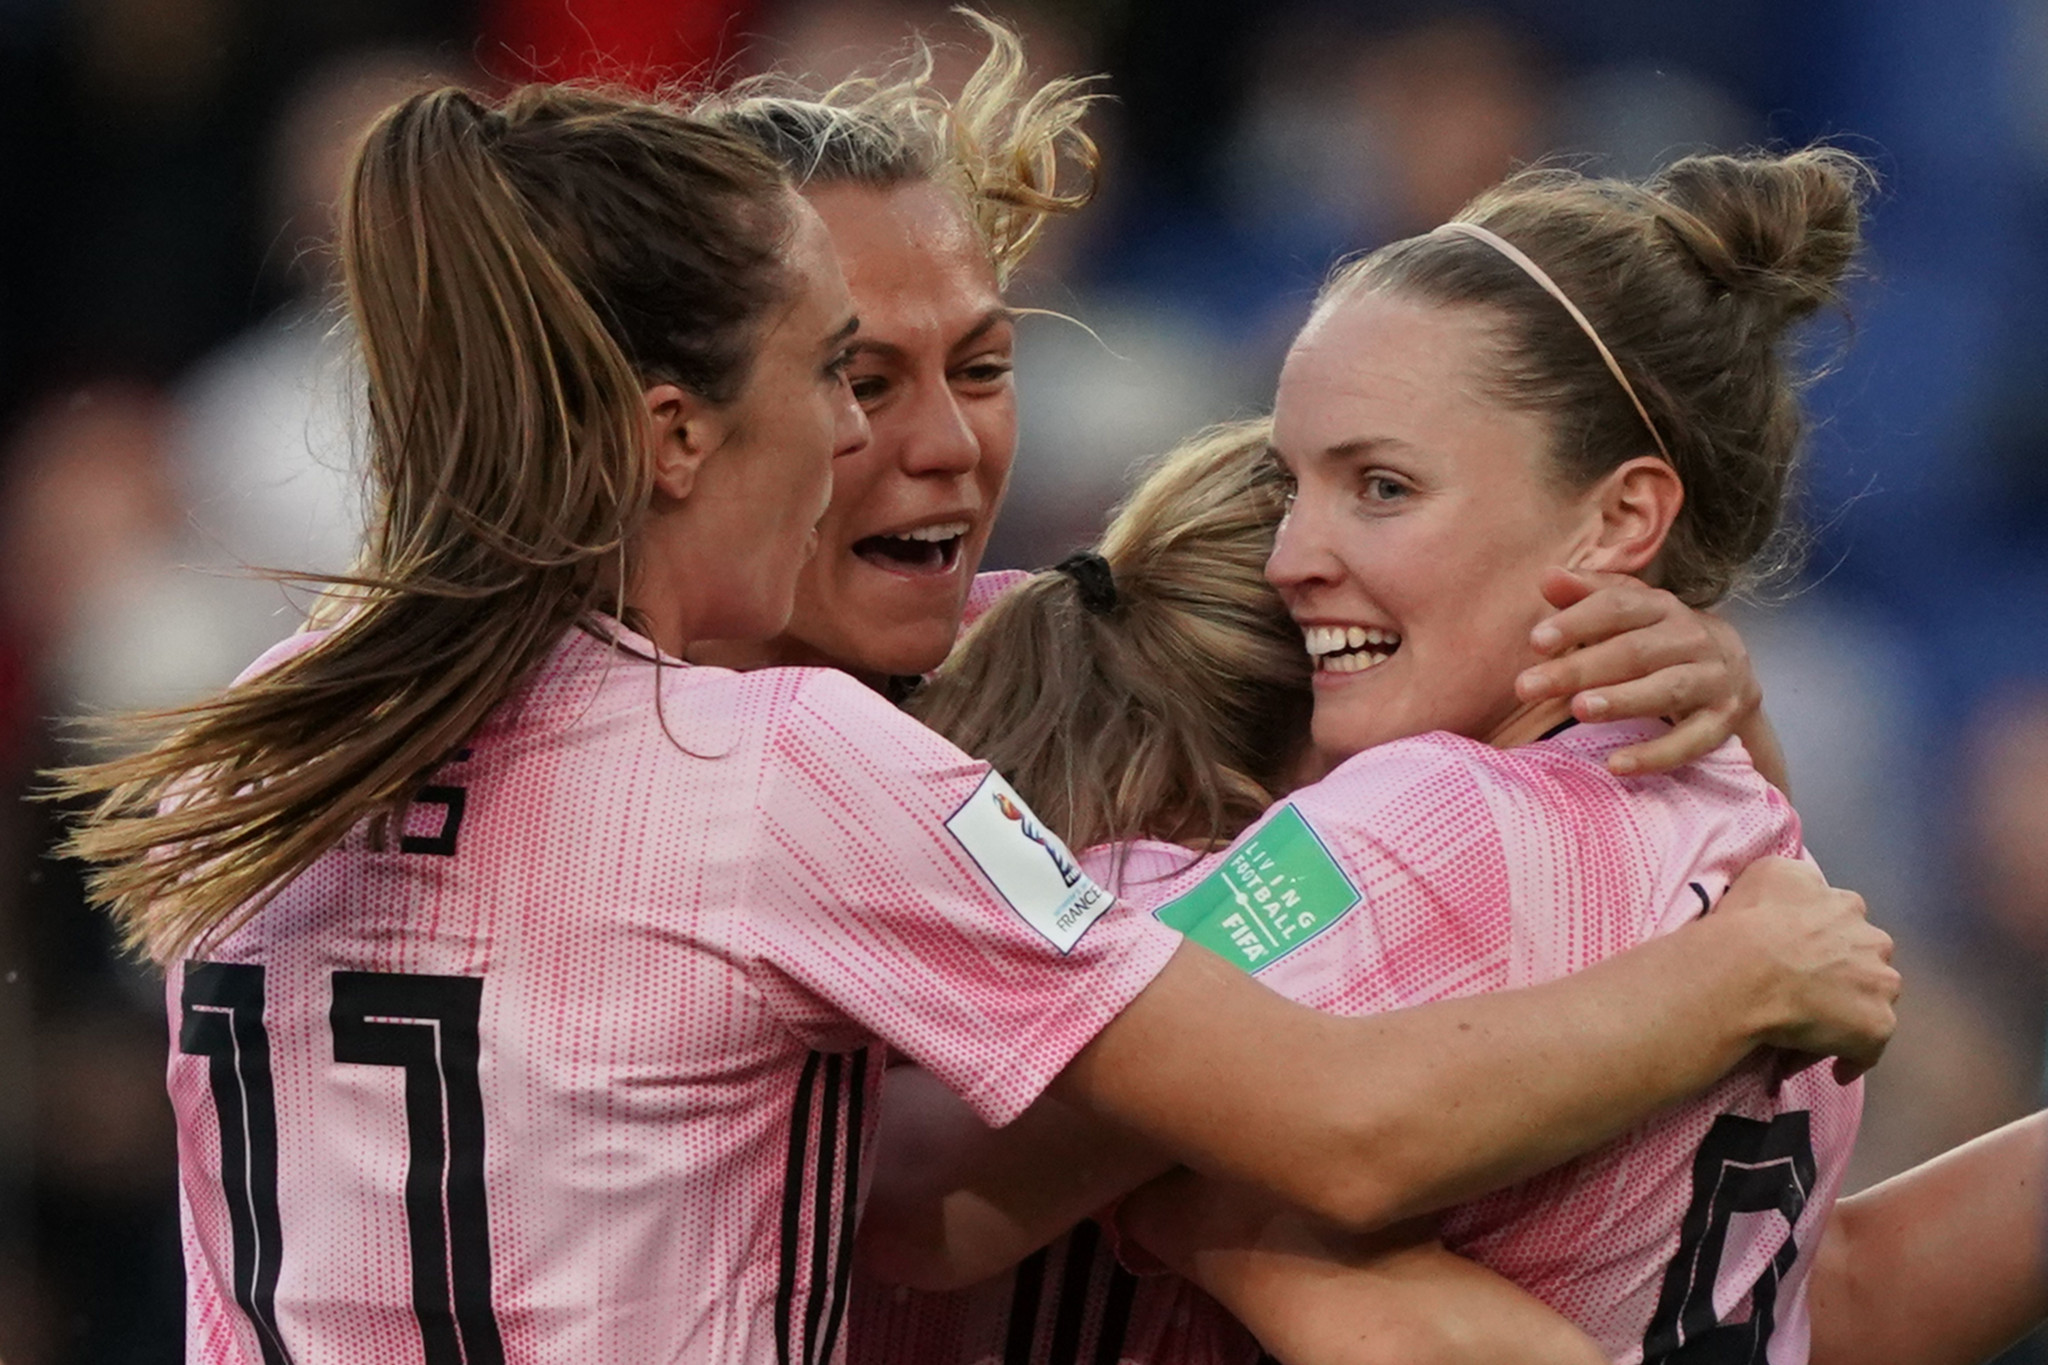 Scotland needed to beat Argentina to have a chance of progression, with Kim Little opening the scoring for them ©Getty Images